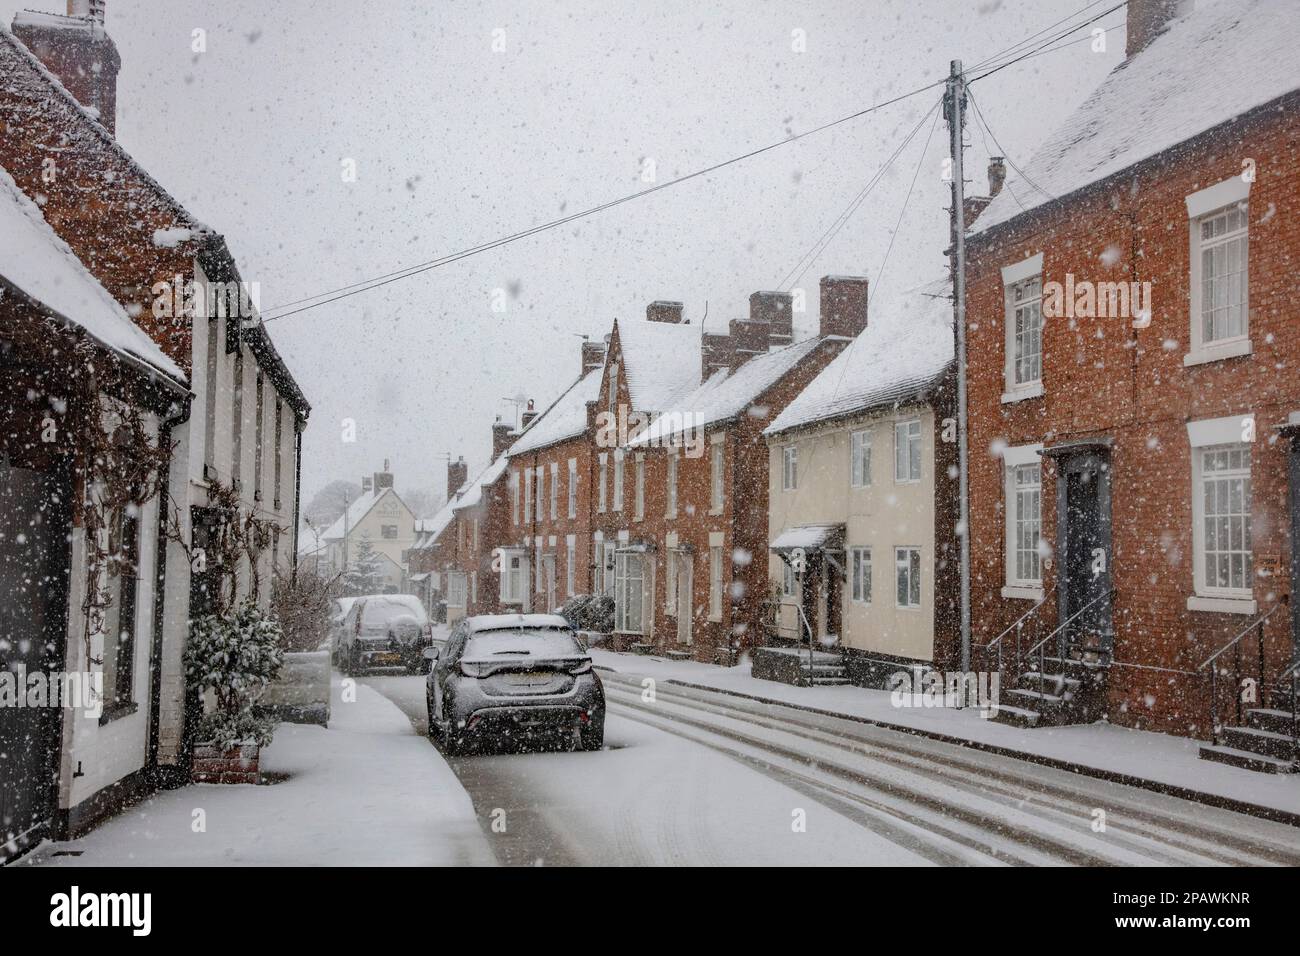 Snow falling in the Village Stock Photo